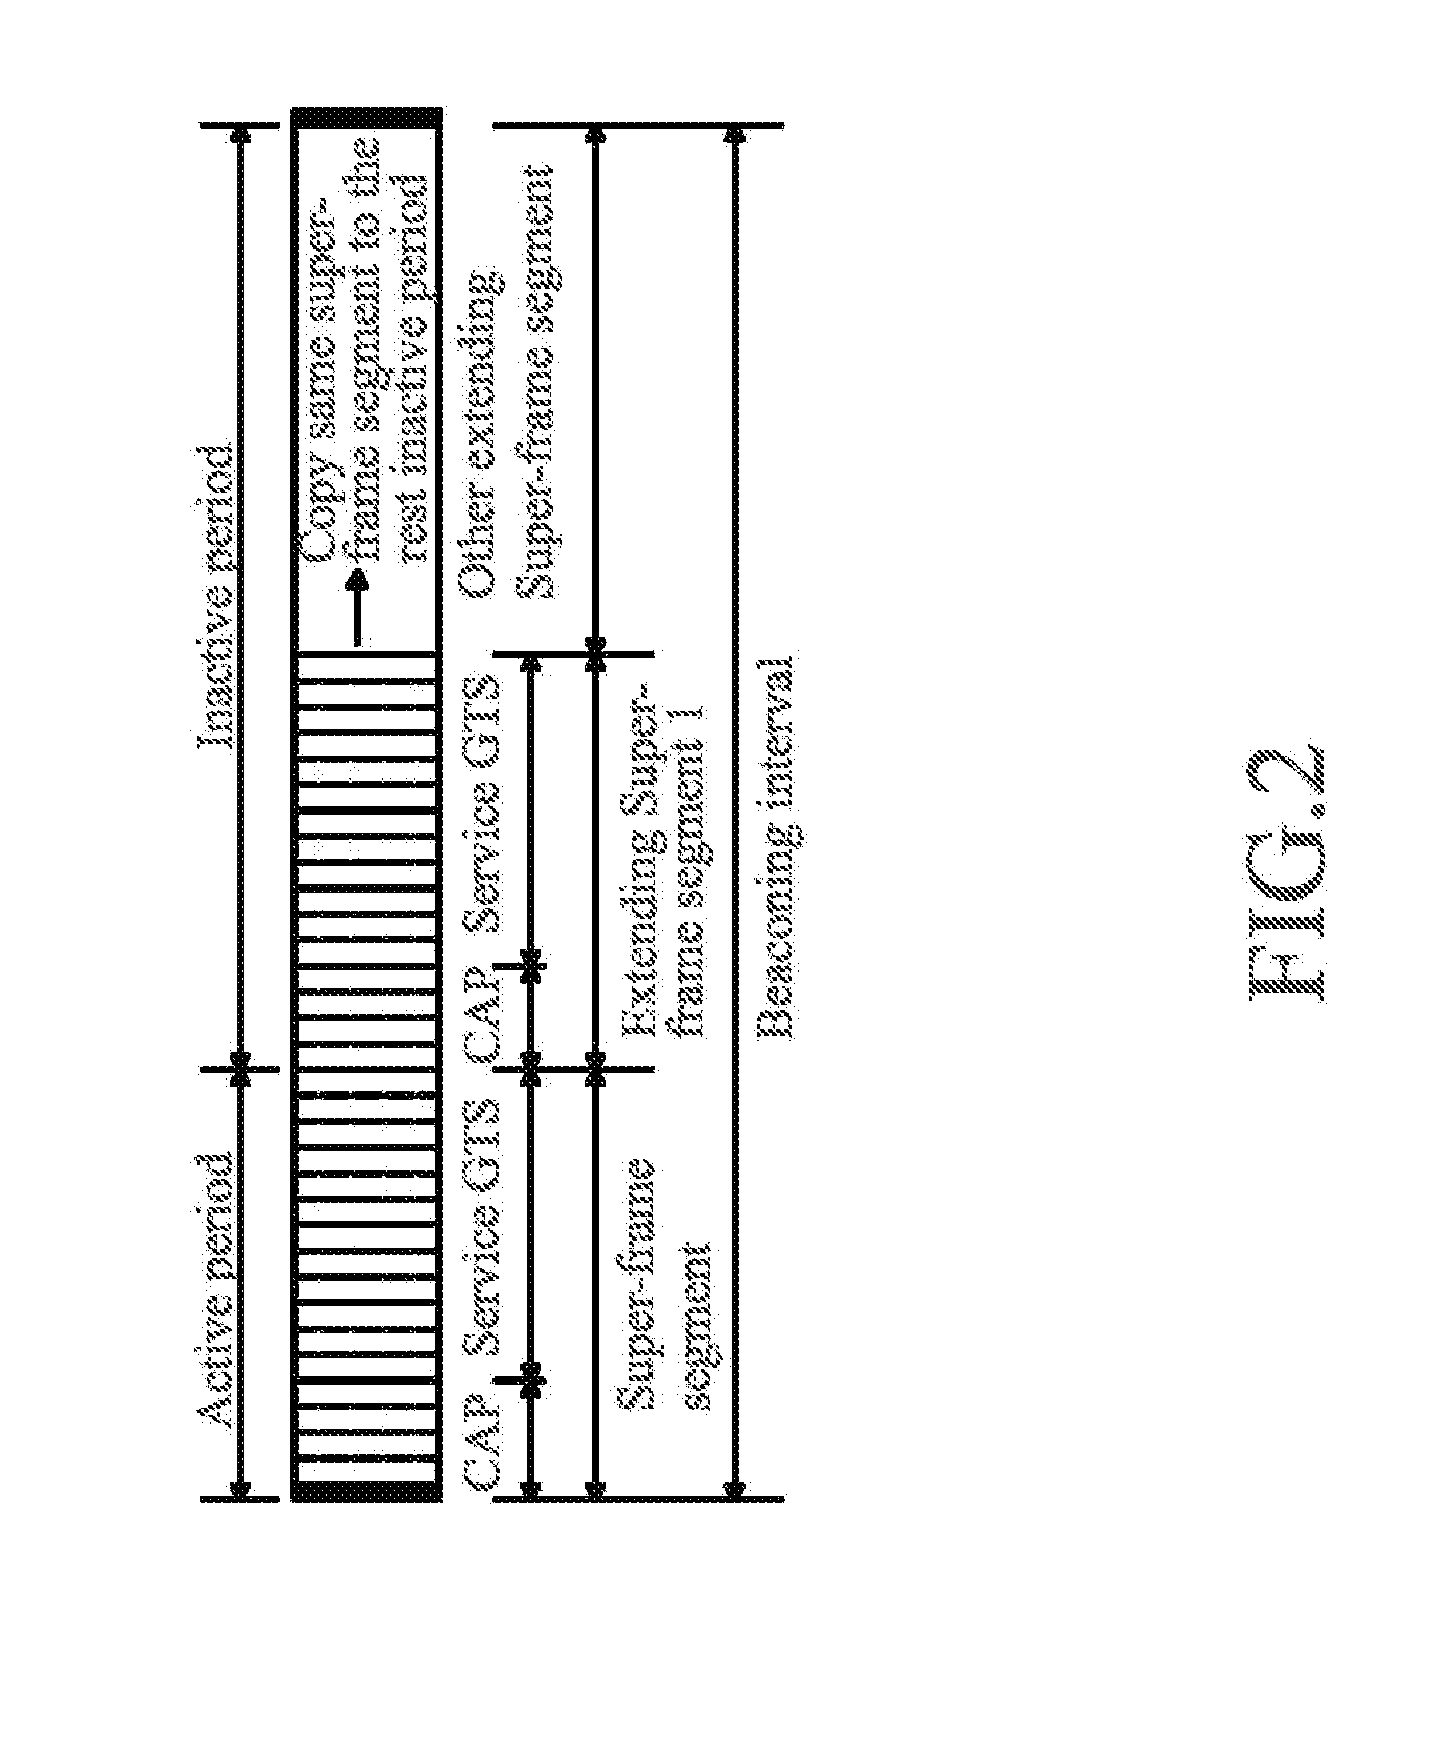 Method for using an extending super-frame to transfer data in a short distance wireless personal area network